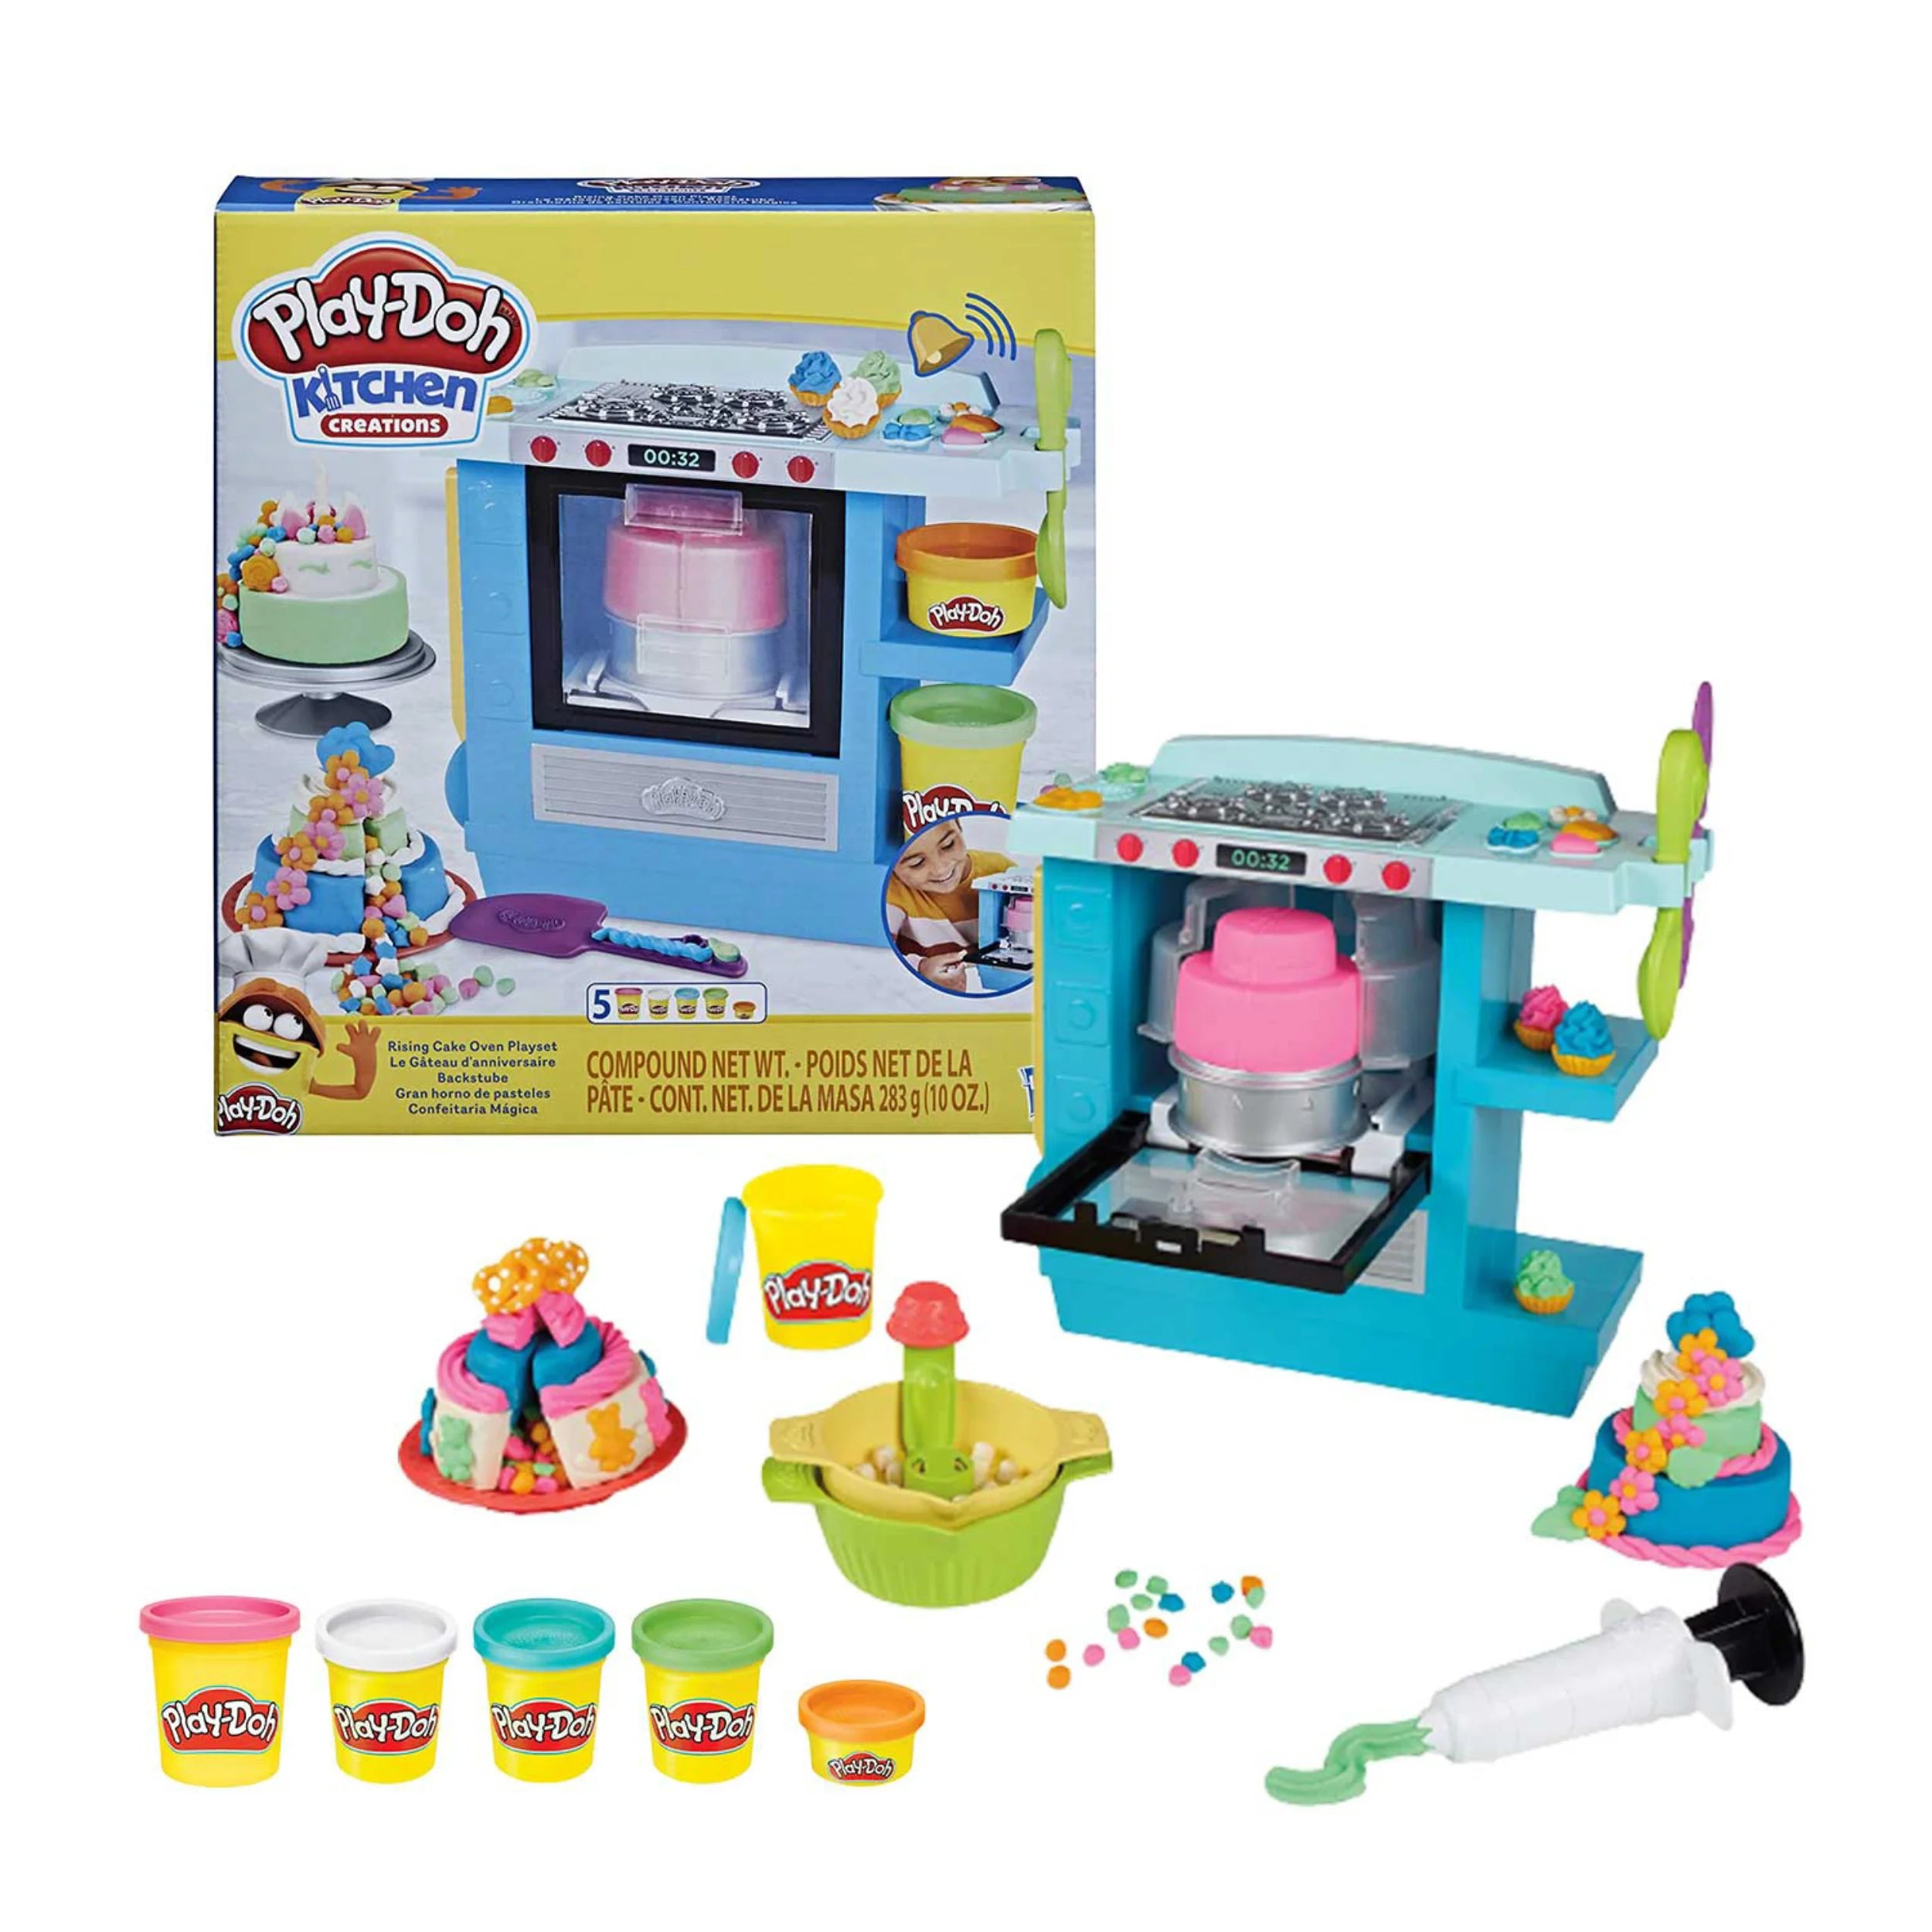 Play-Doh Kitchen Creations Rising Cake Oven Playset, 1 ct - Jay C